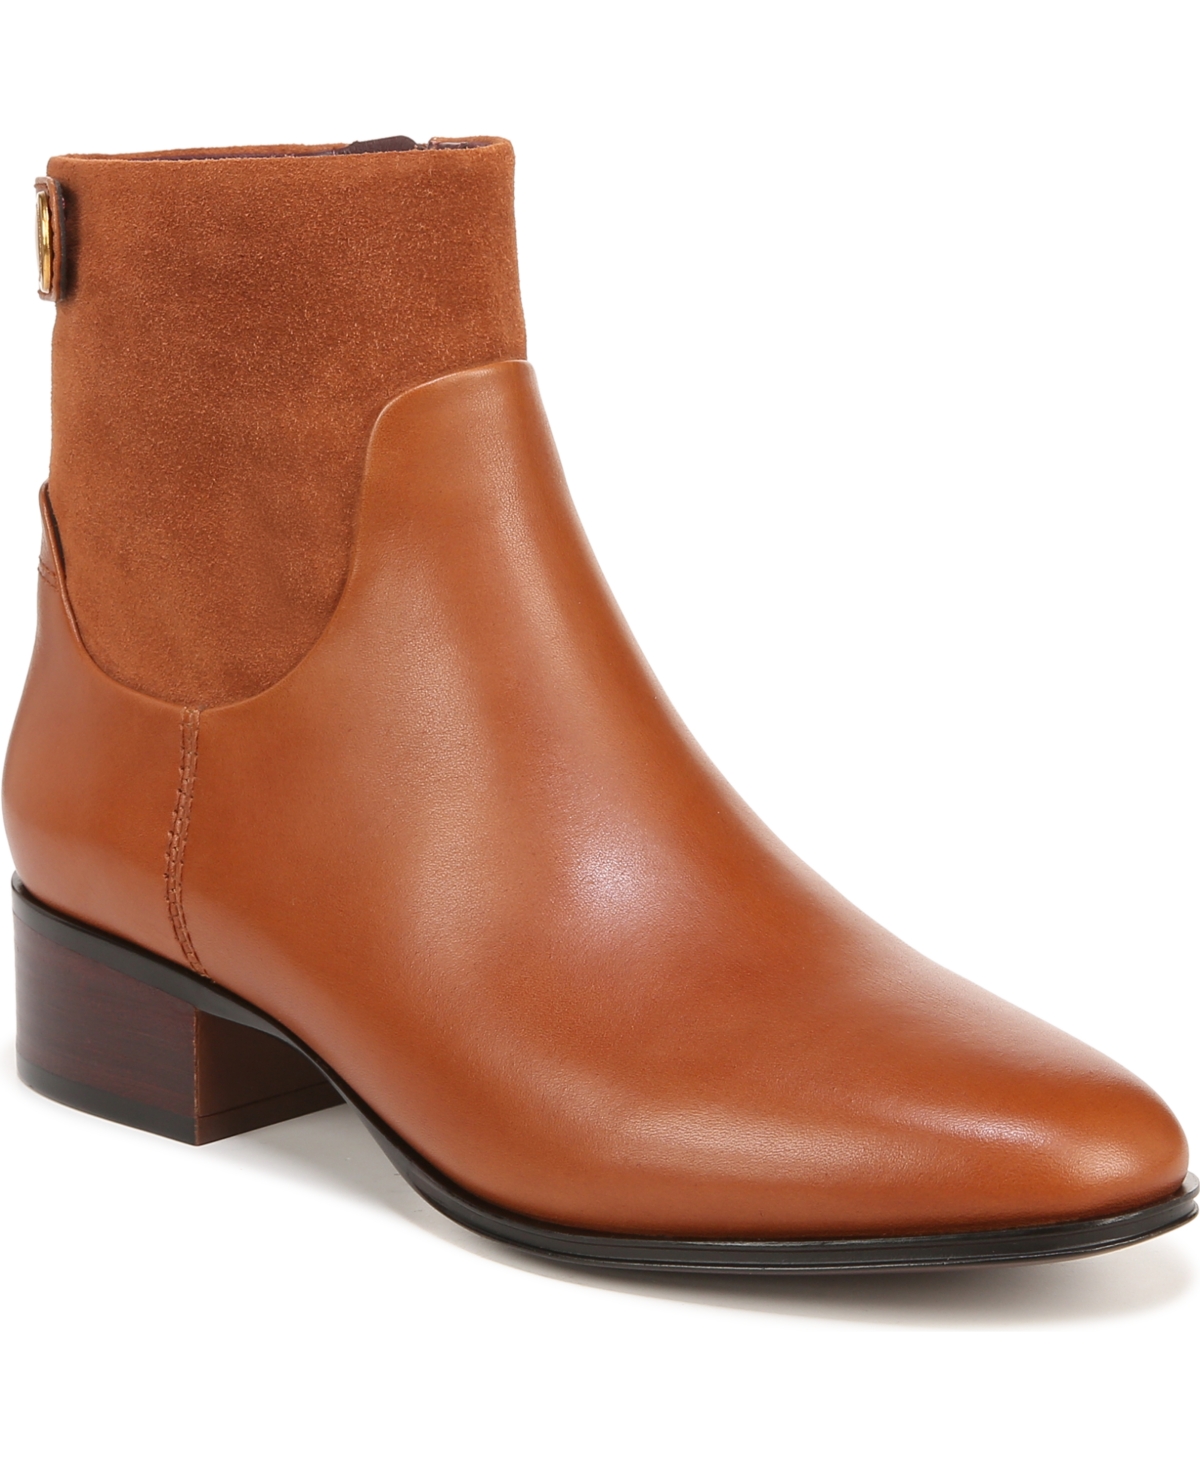 Women's Jessica Stacked Heel Casual Booties - Brown Leather/Suede